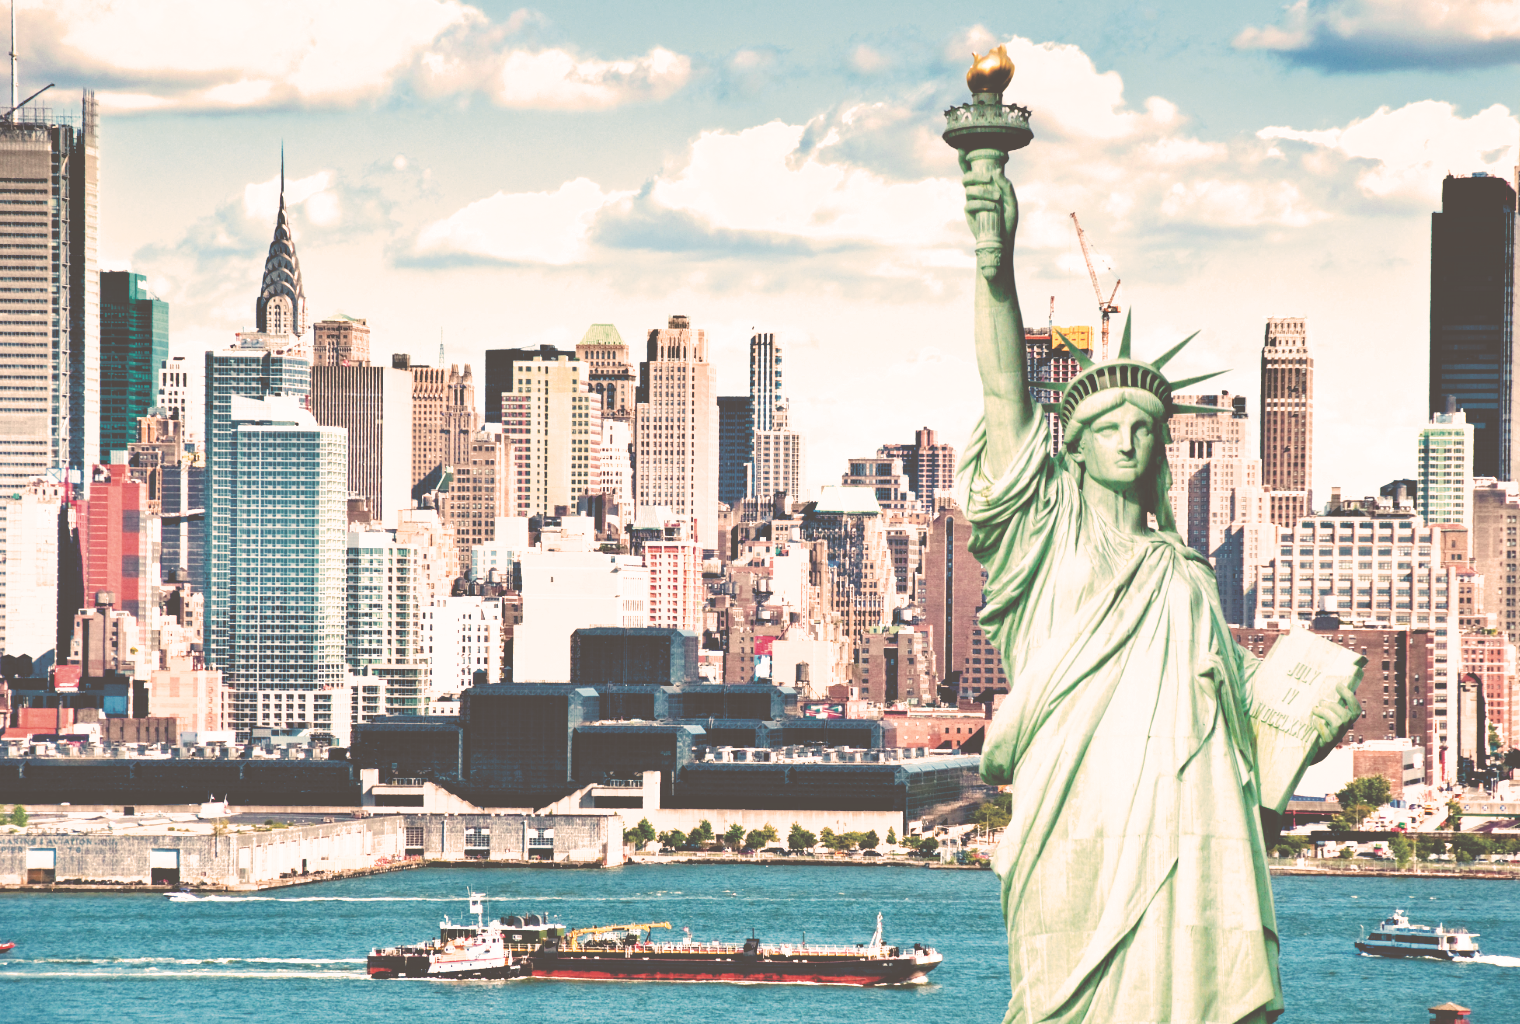 New York Orders Bittrex to Cease Operations but Green-Lights Bitstamp